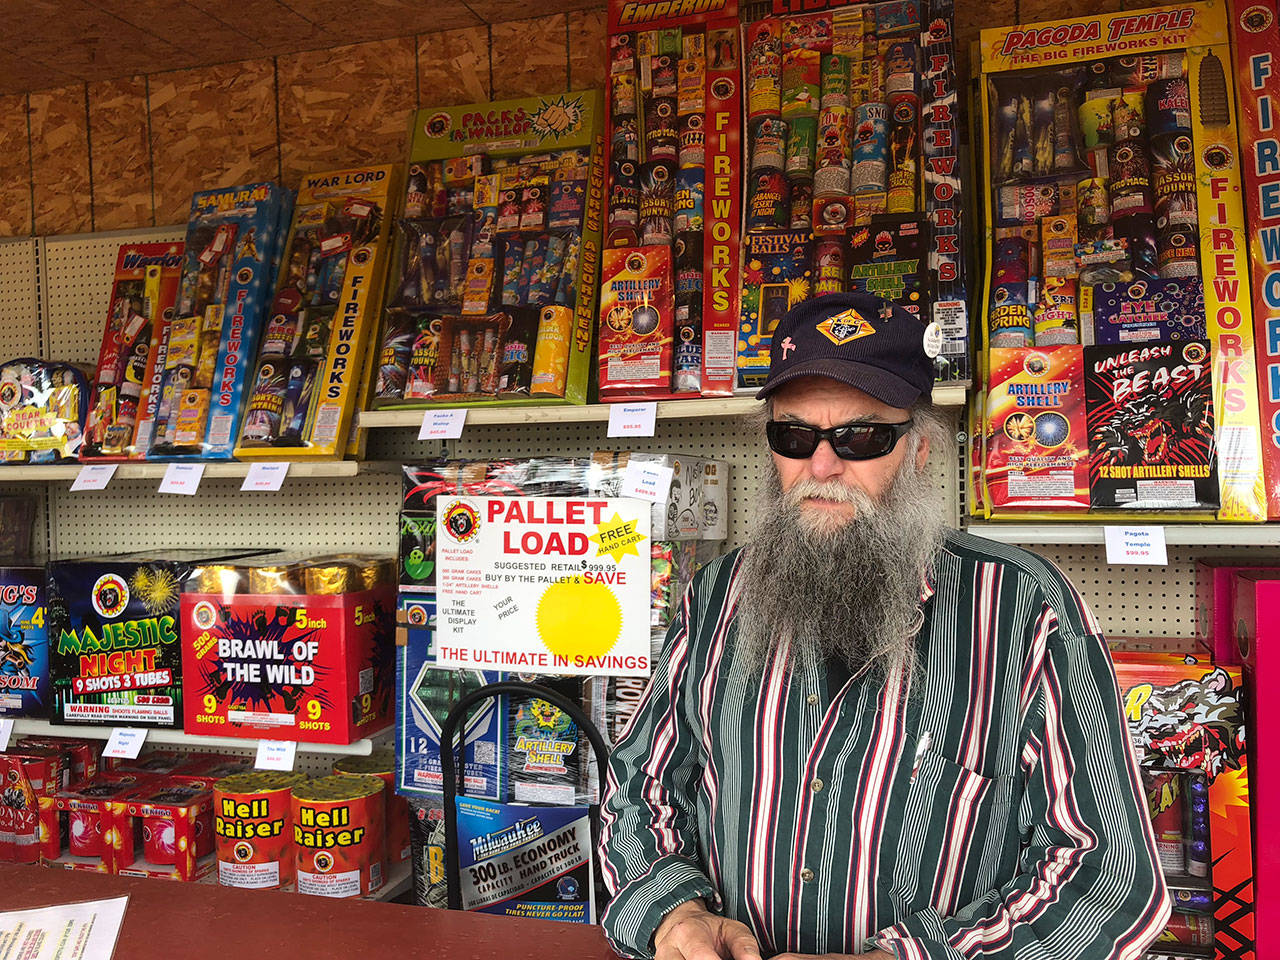 Maurie Tonini is a member of the Oak Harbor council of the Knights of Columbus and helps with the fireworks fundraiser. Photo by Emily Gilbert/Whidbey News-Times